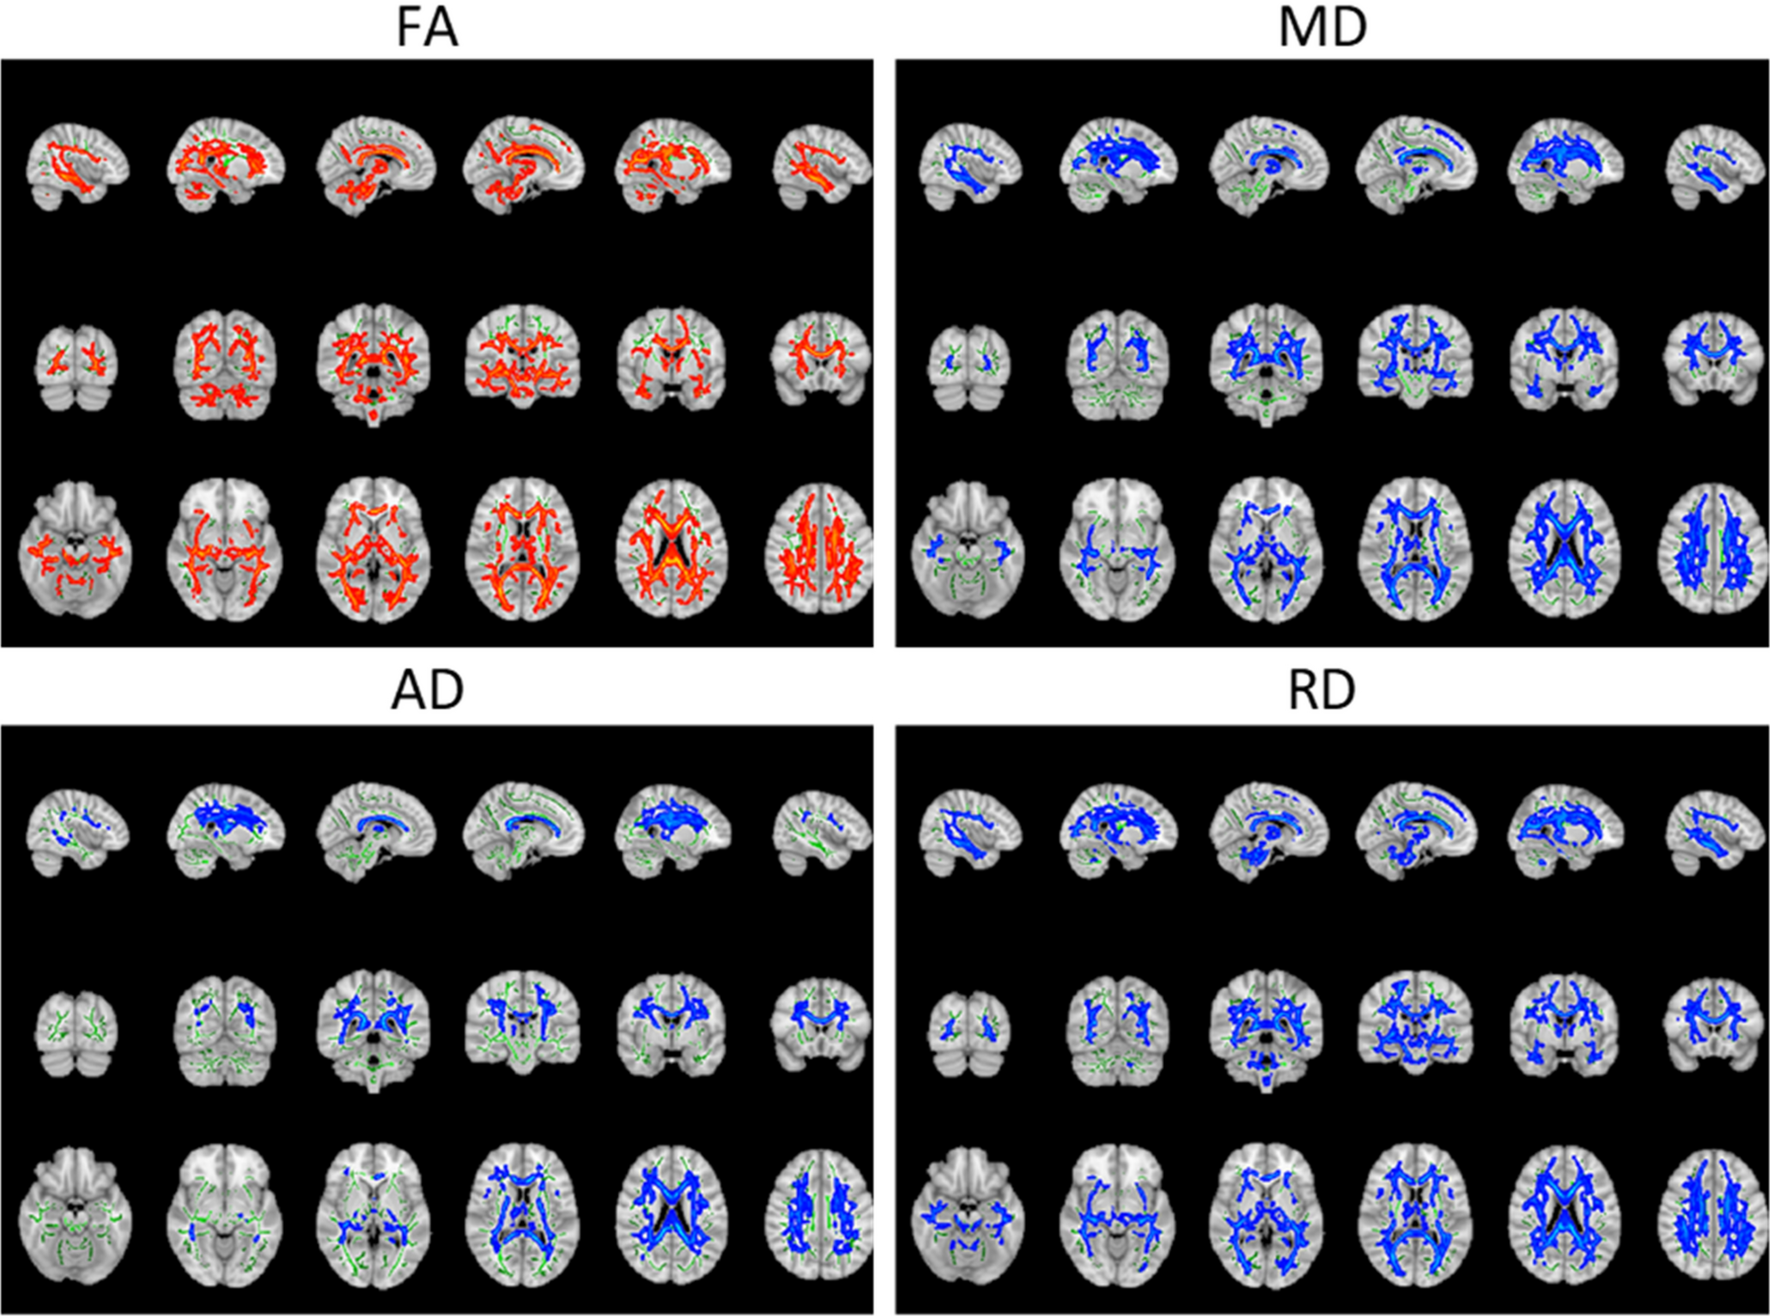 Radial diffusivity reflects general decline rather than specific cognitive  deterioration in multiple sclerosis | Scientific Reports